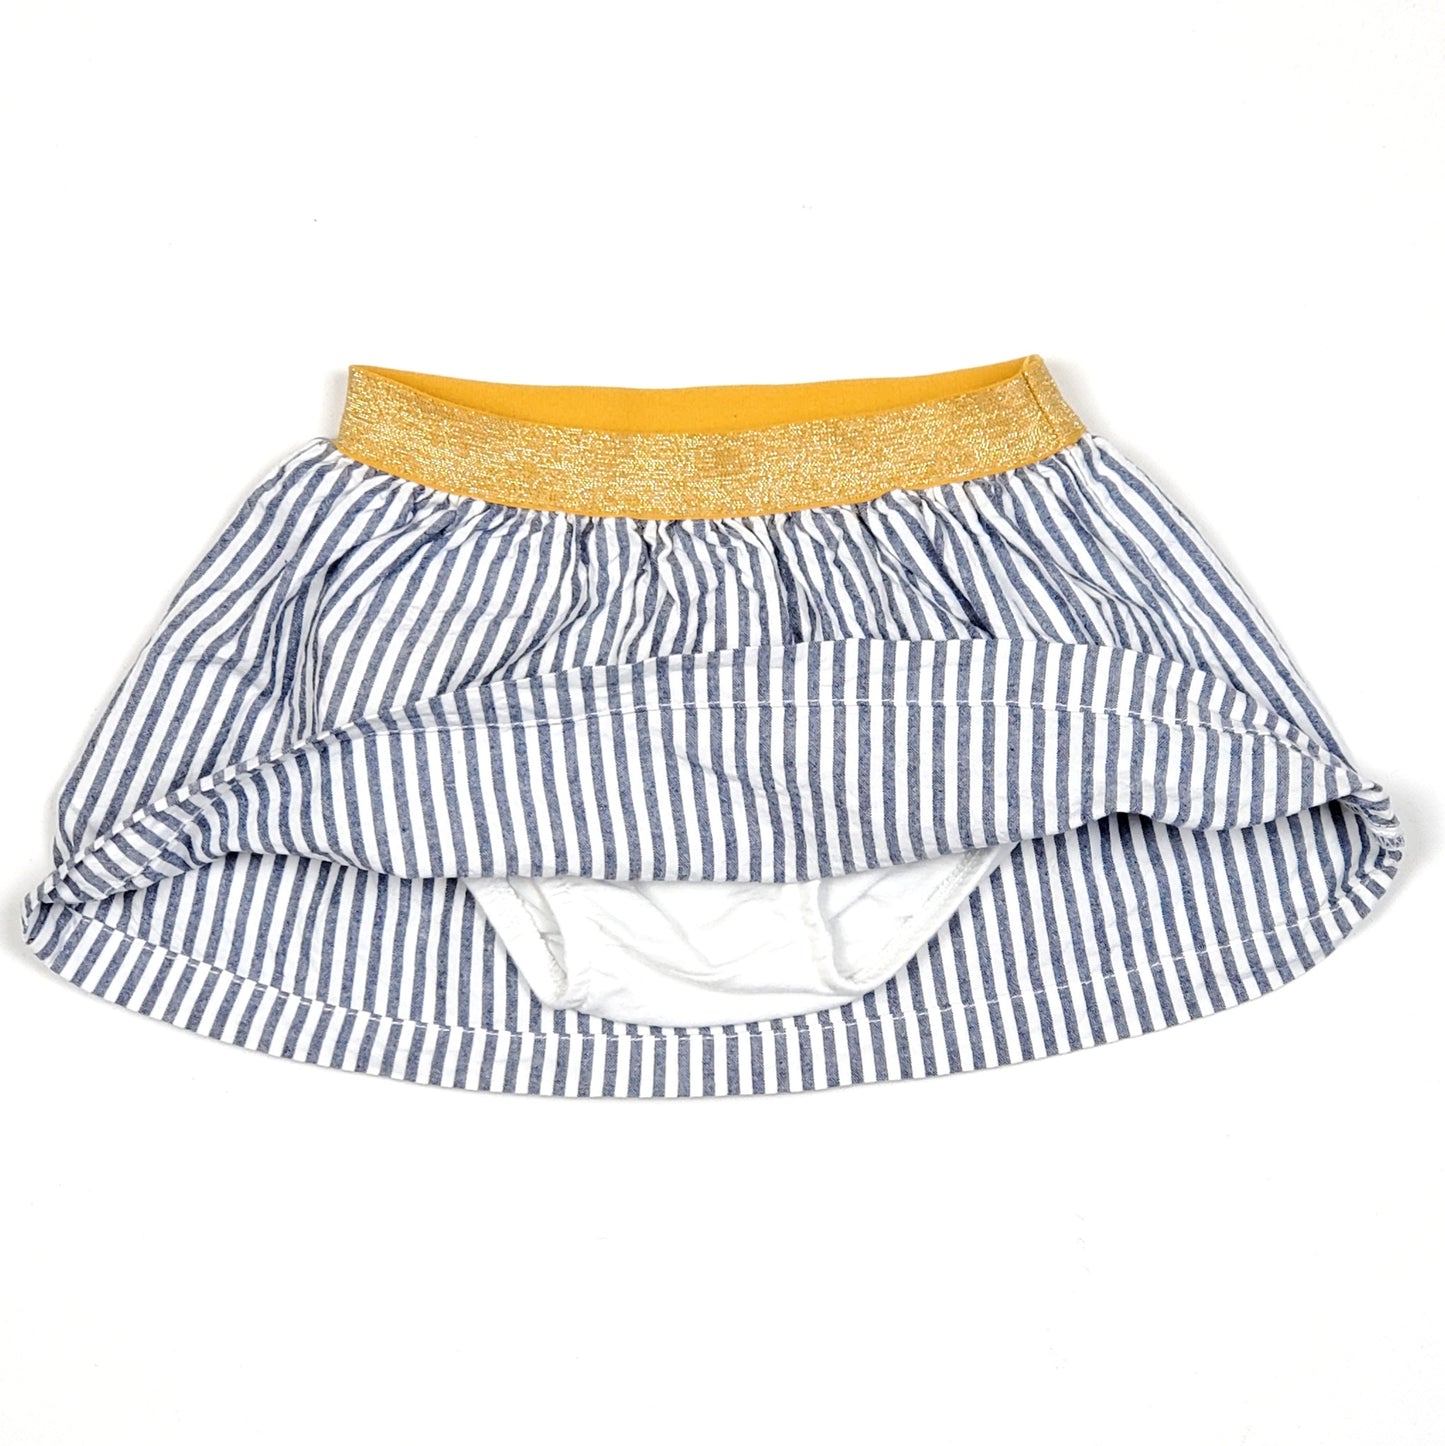 Carters Girls Blue Striped Skirt 18M Used View 2